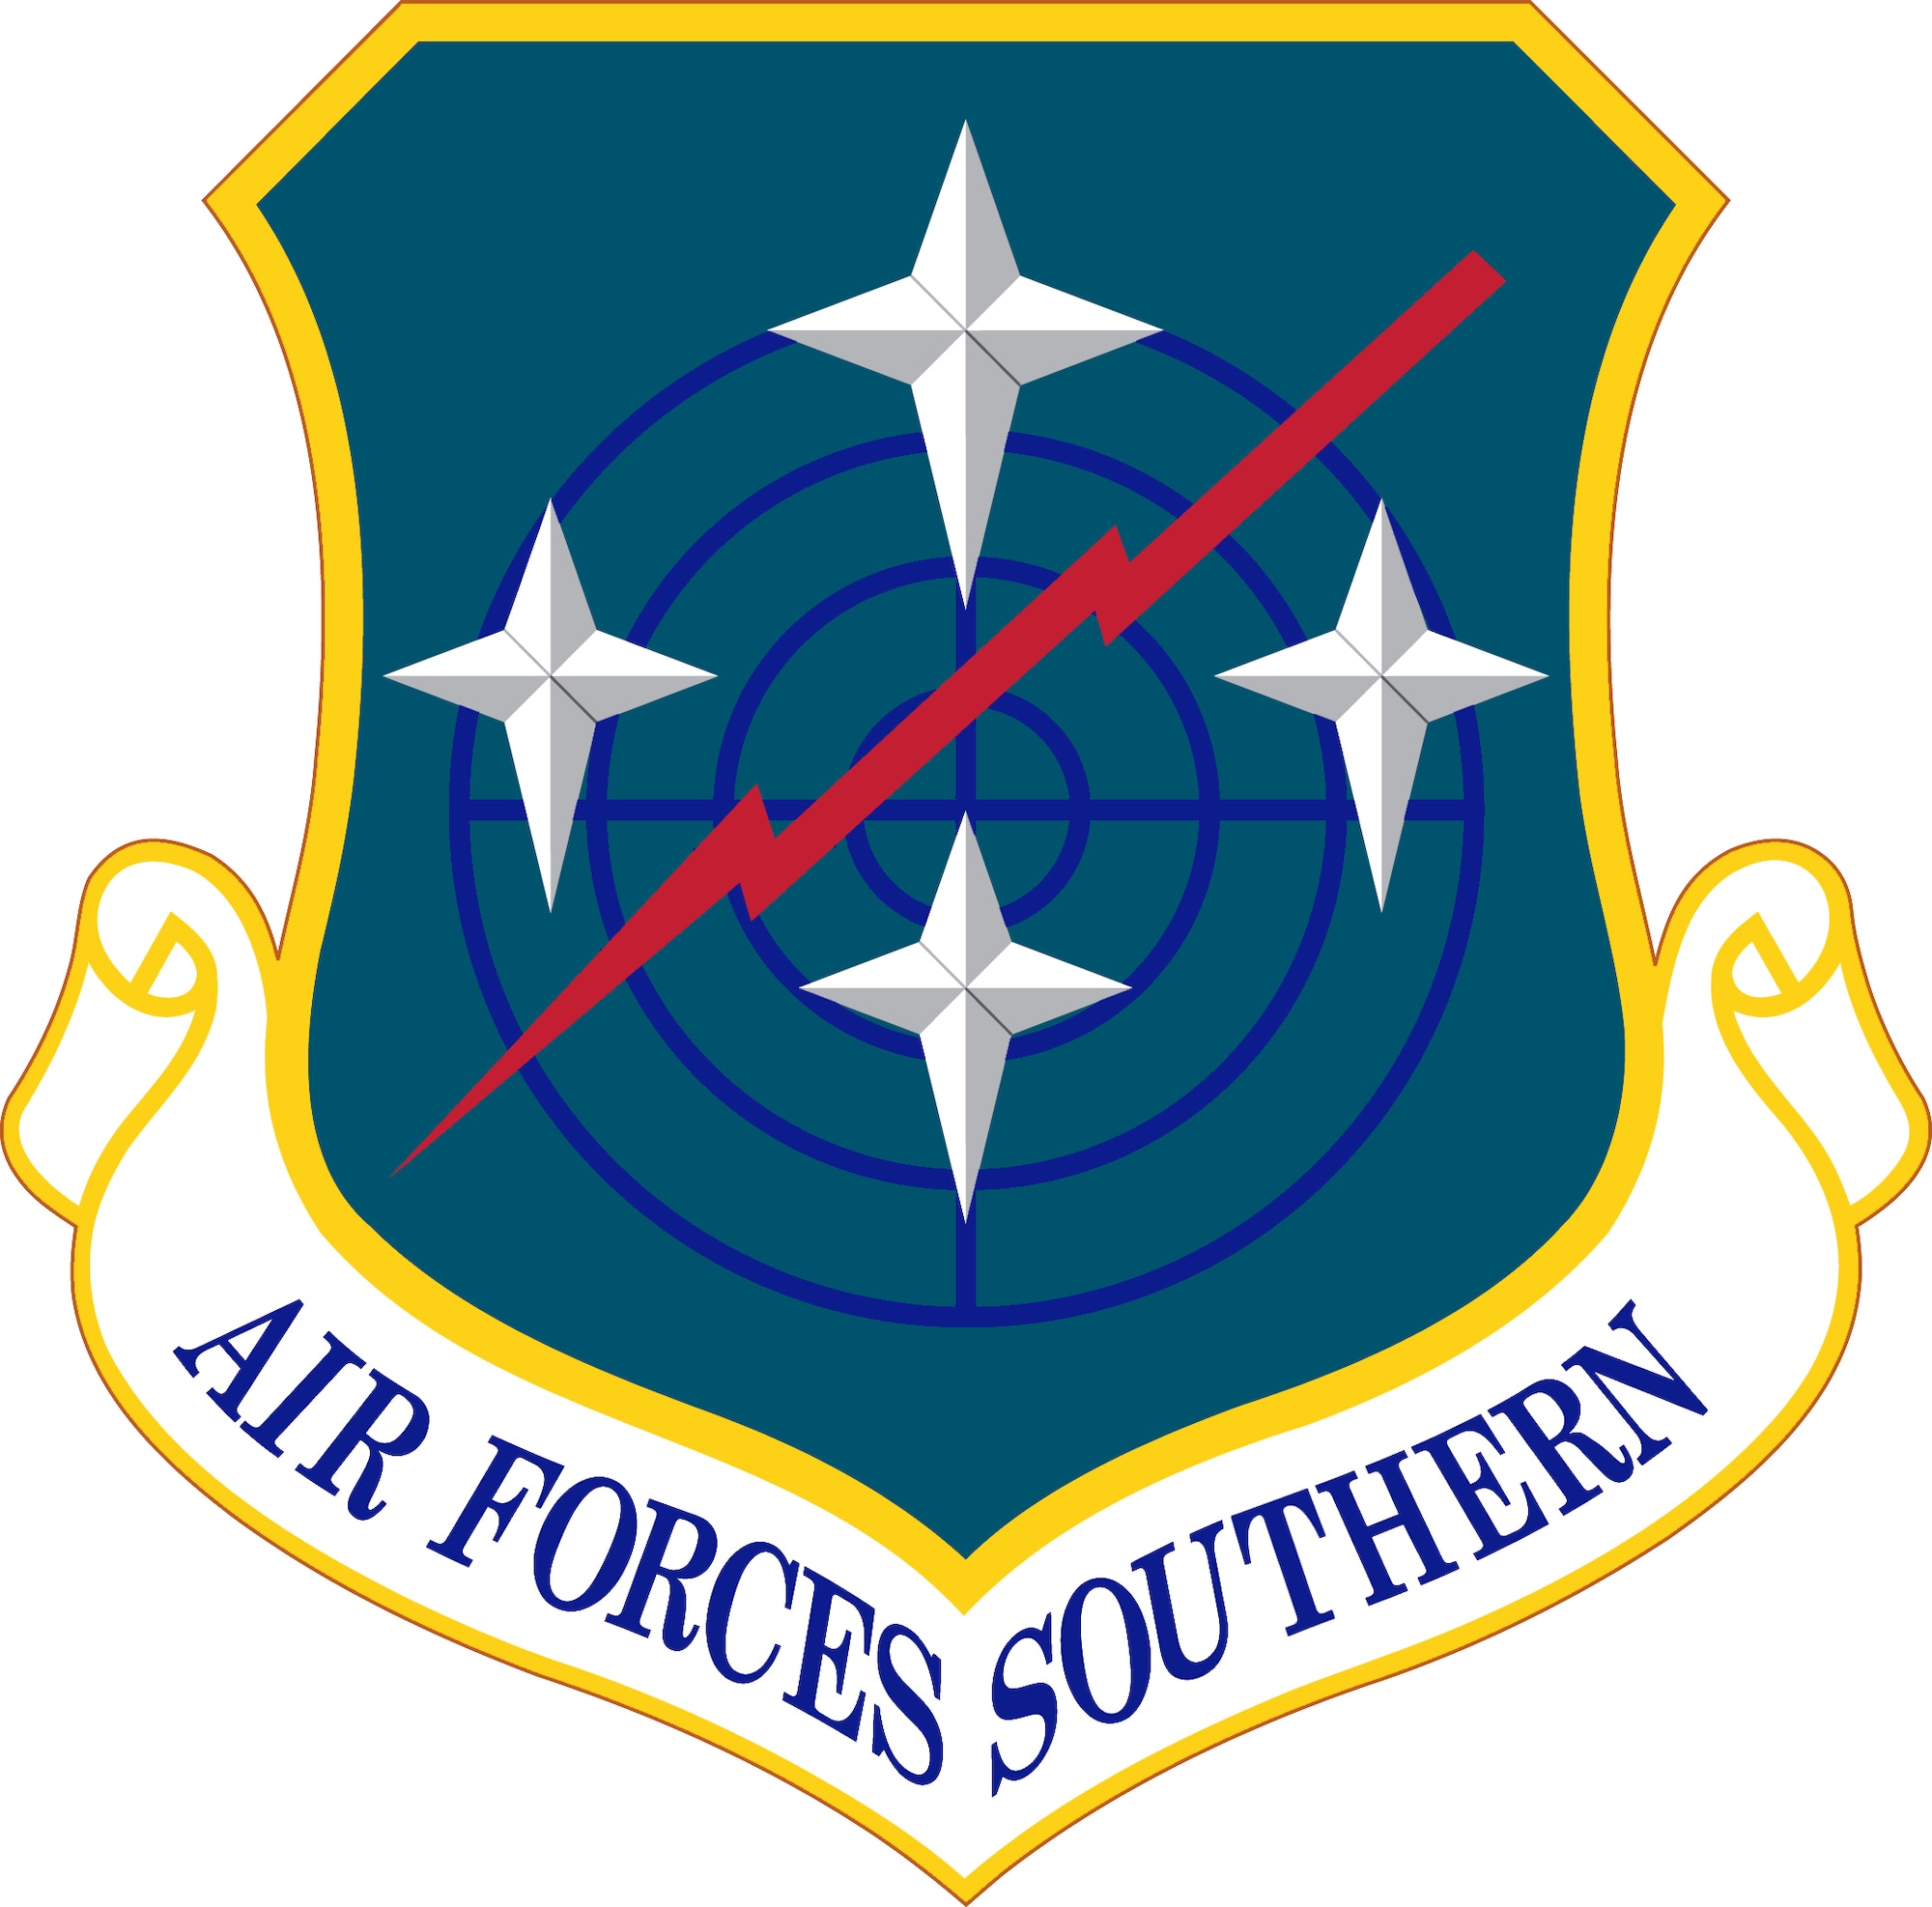 Air Force Southern (Color).  Image provided by the Institute of Heraldry. In accordance with Chapter 3 of AFI 84-105, commercial reproduction of this emblem is NOT permitted without the permission of the proponent organizational/unit commander. The image is 7x7 inches @ 300 dpi.